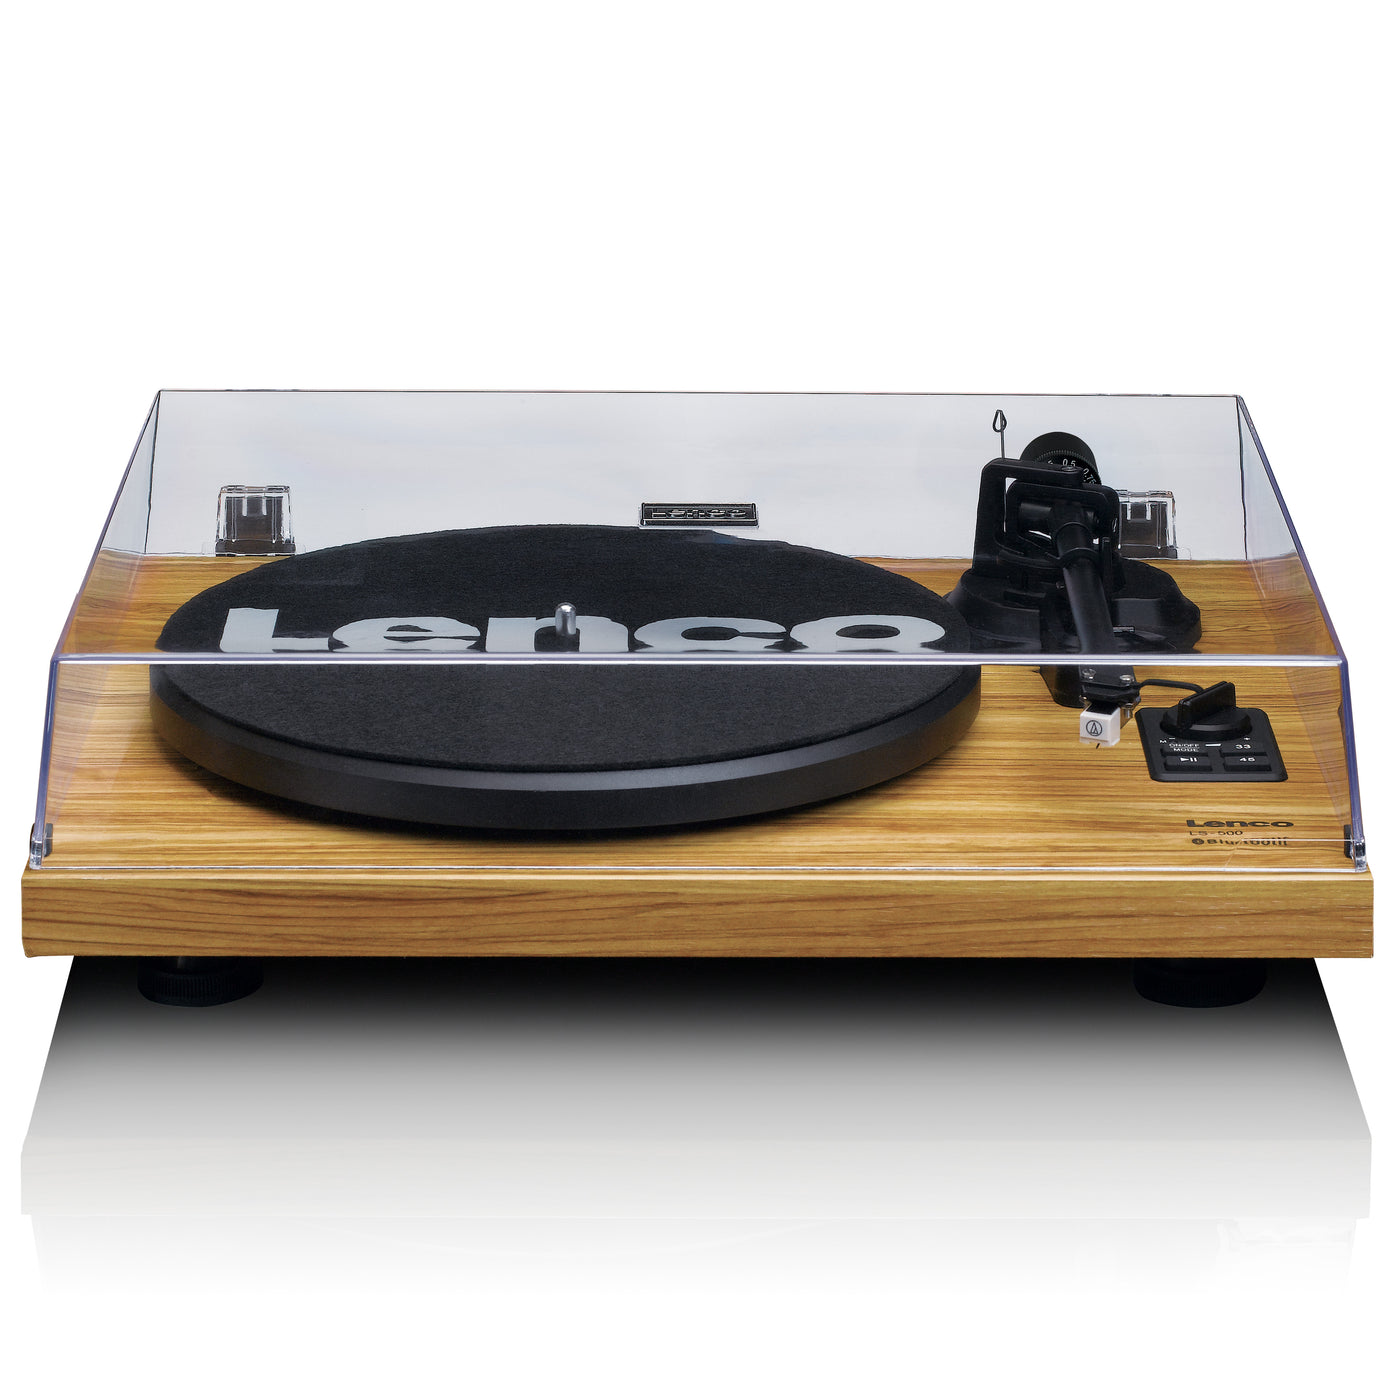 LENCO LS-500OK - Record player with built-in amplifier and Bluetooth® plus 2 external speakers - Wood